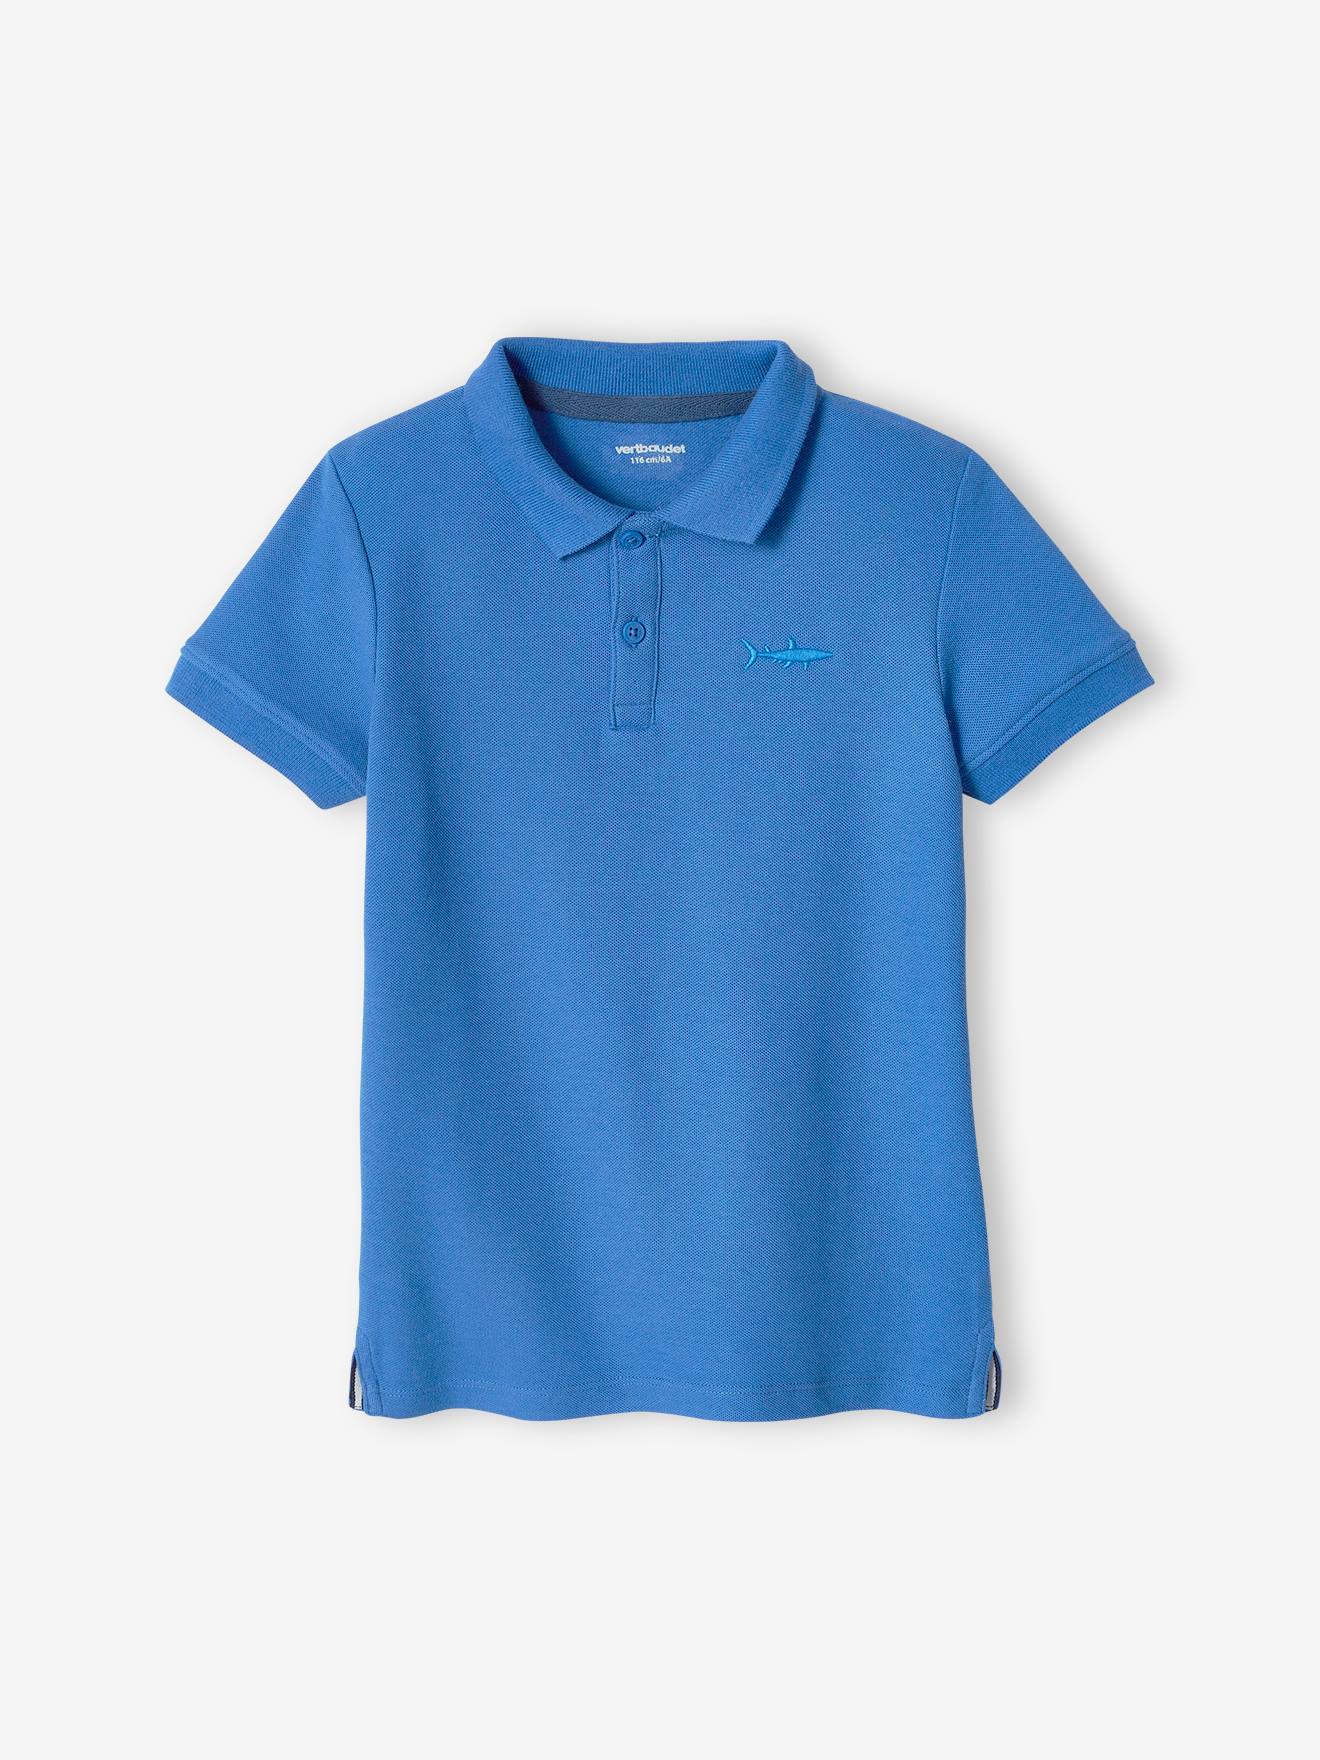 Short Sleeve Polo Shirt, Embroidery on the Chest, for Boys electric blue